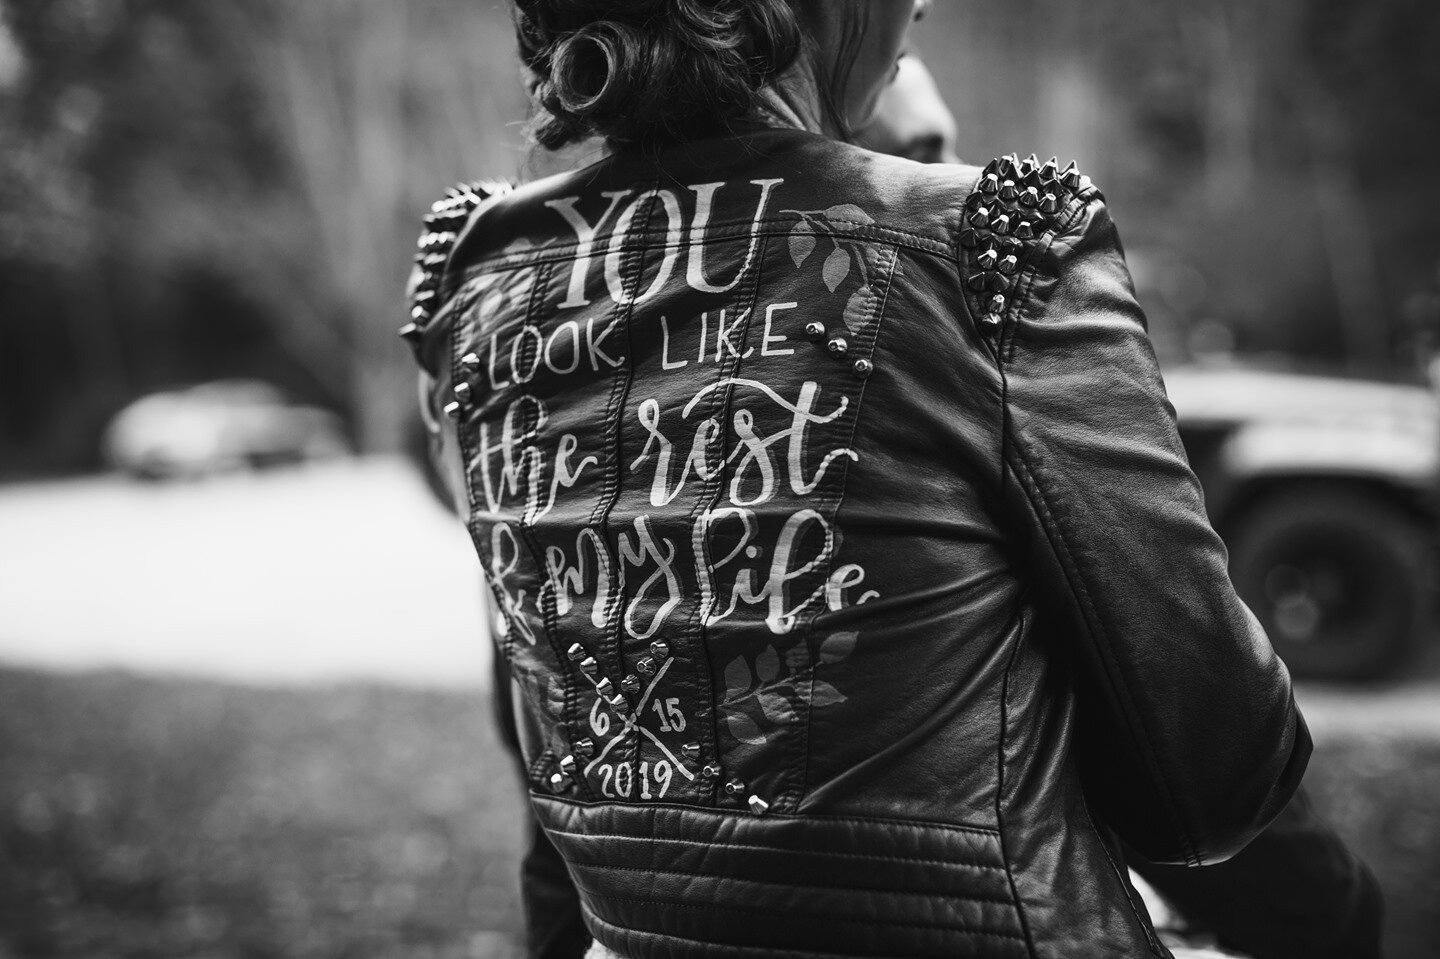 &quot;You look like the rest of my life....&quot; Check out this amazingly detailed jacket hand painted by @theadirondackink for @mrs.shorty322 wedding day! AND how lucky am I that she made one for my wedding next year too! ️⁠
⁠
⁠
#danitphotogr